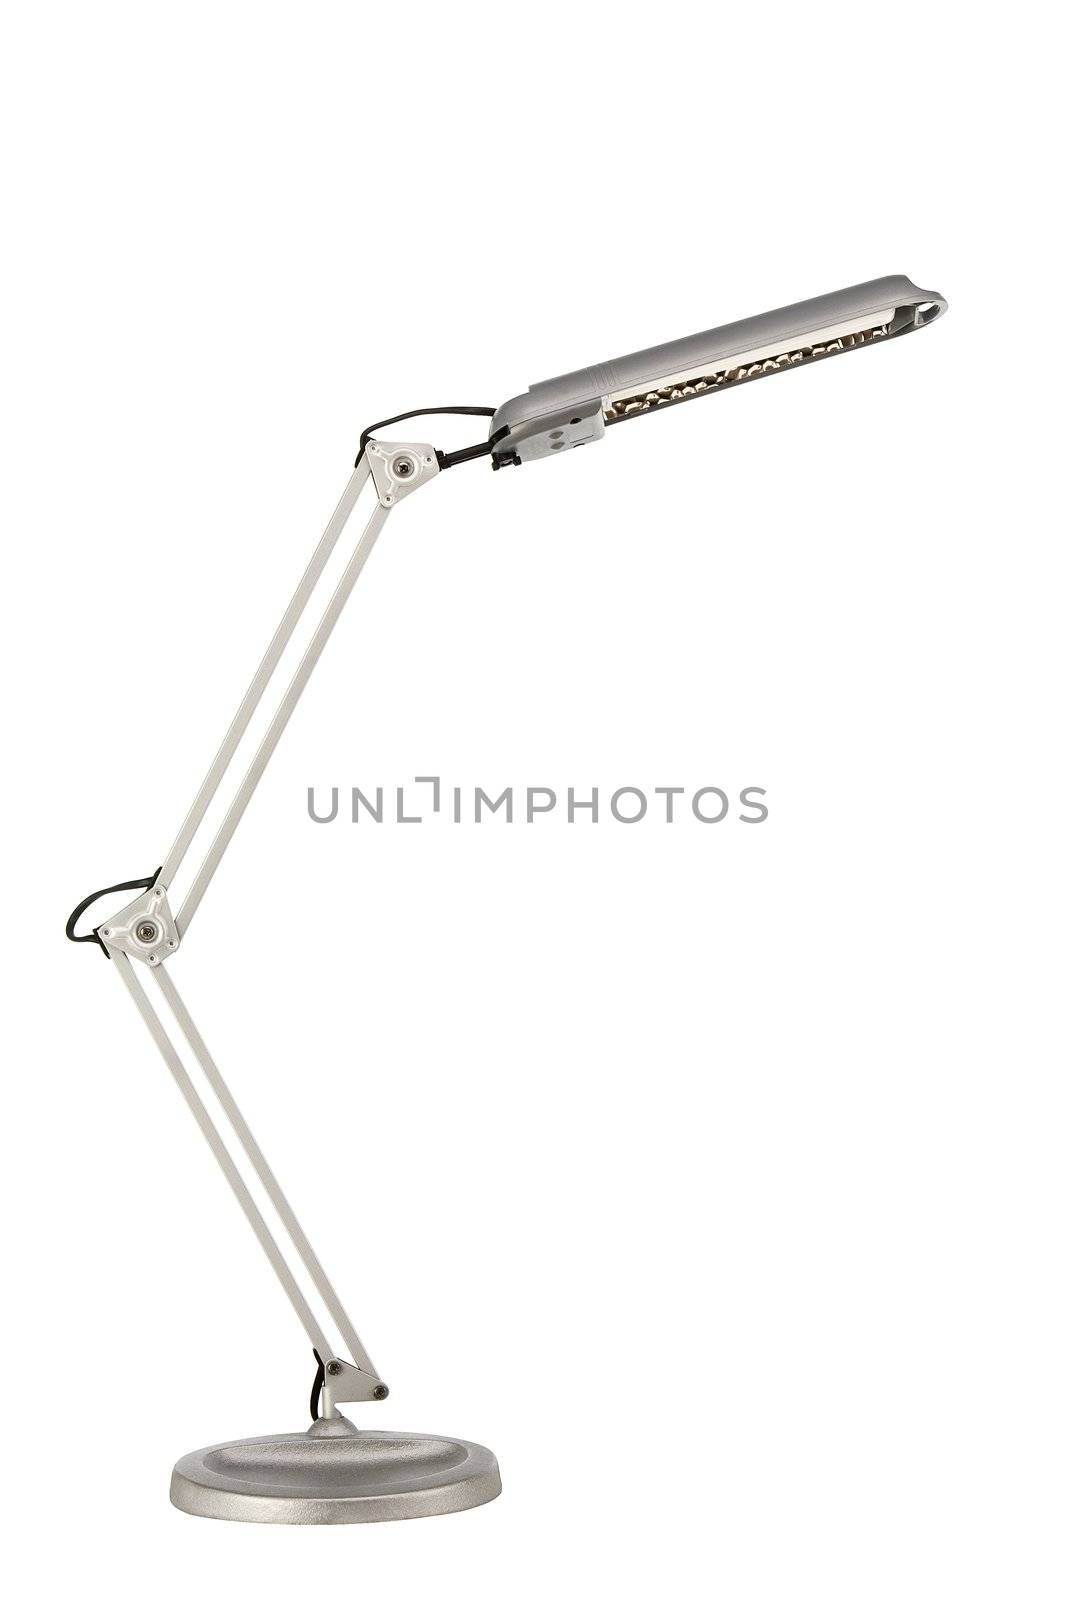 Silvery new desk lamp on a white background
